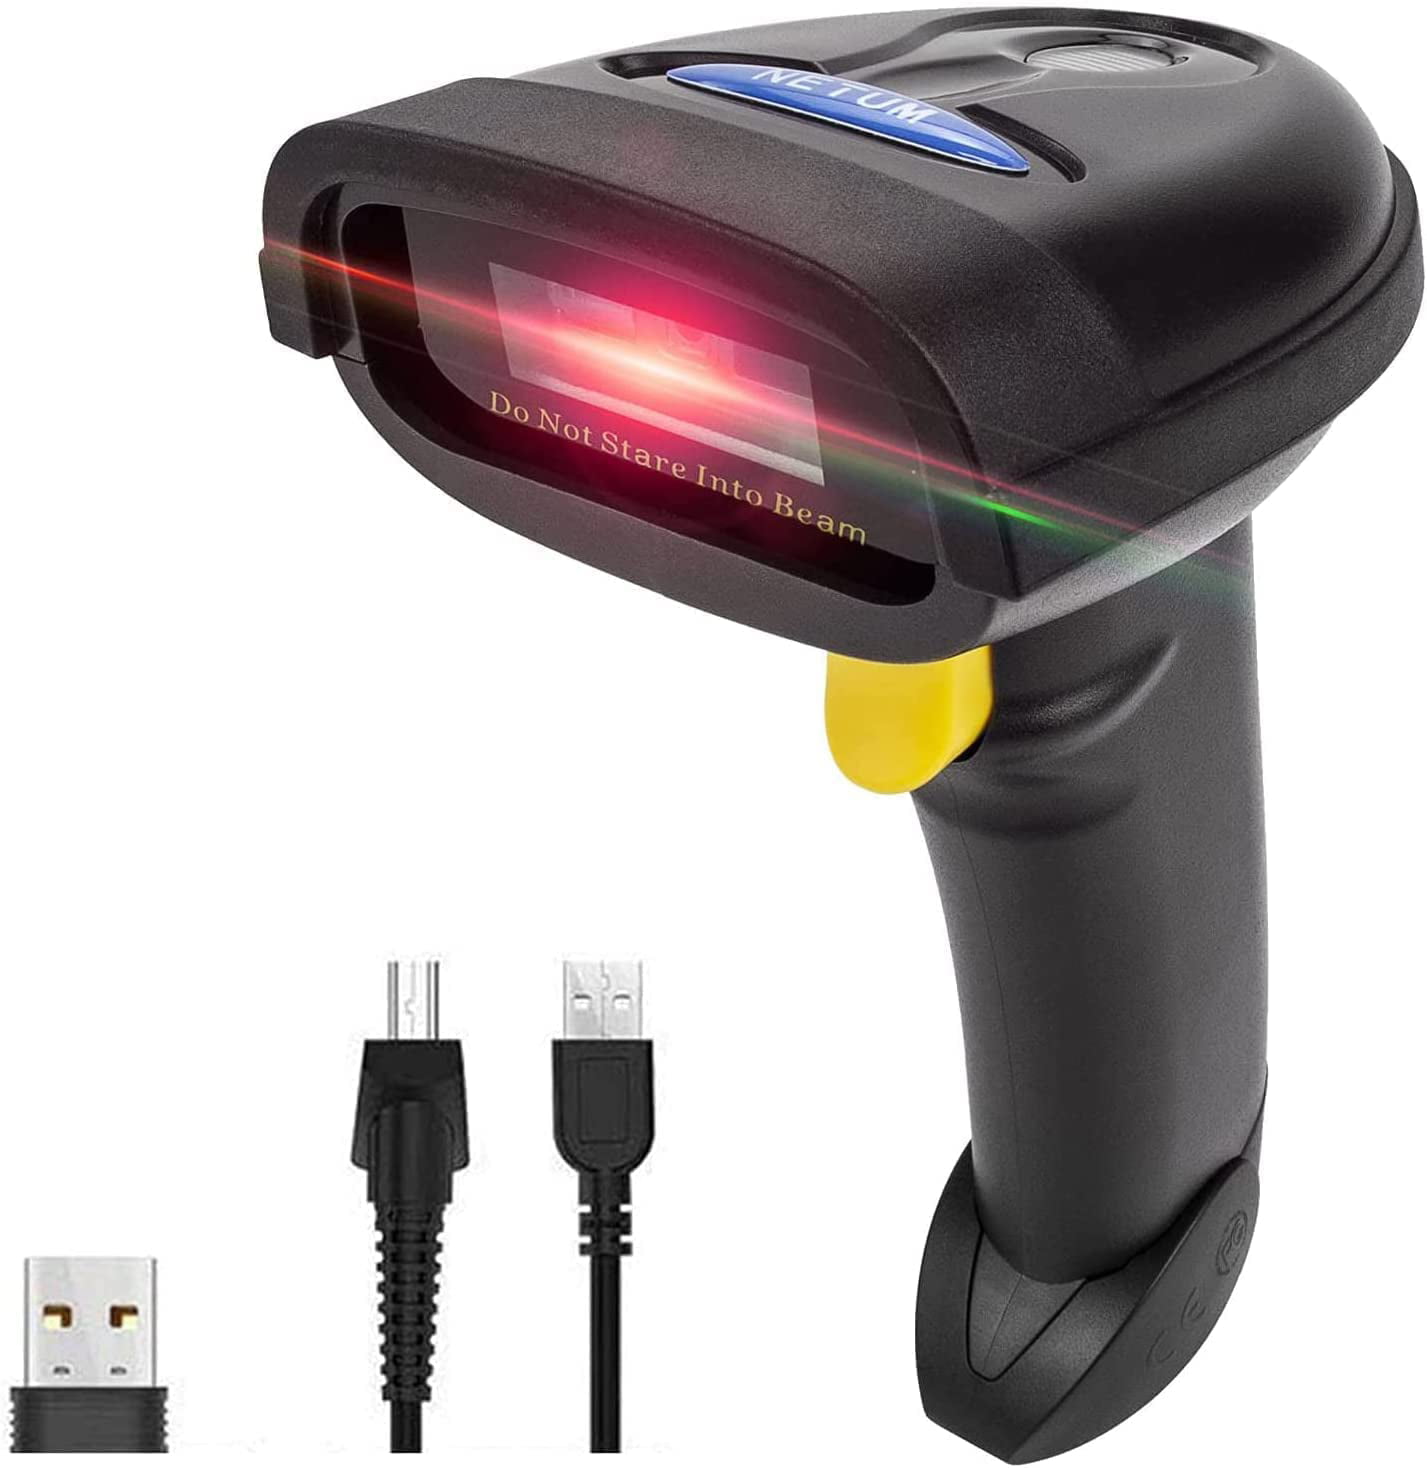 2D Barcode Scanner, with 2.4G Wireless Bluetooth & USB Wired Connection, Connect Smart Phone, Tablet, PC, 1D Code Reader Work for QR PDF417 Data Matrix NT-1228BL - Walmart.com